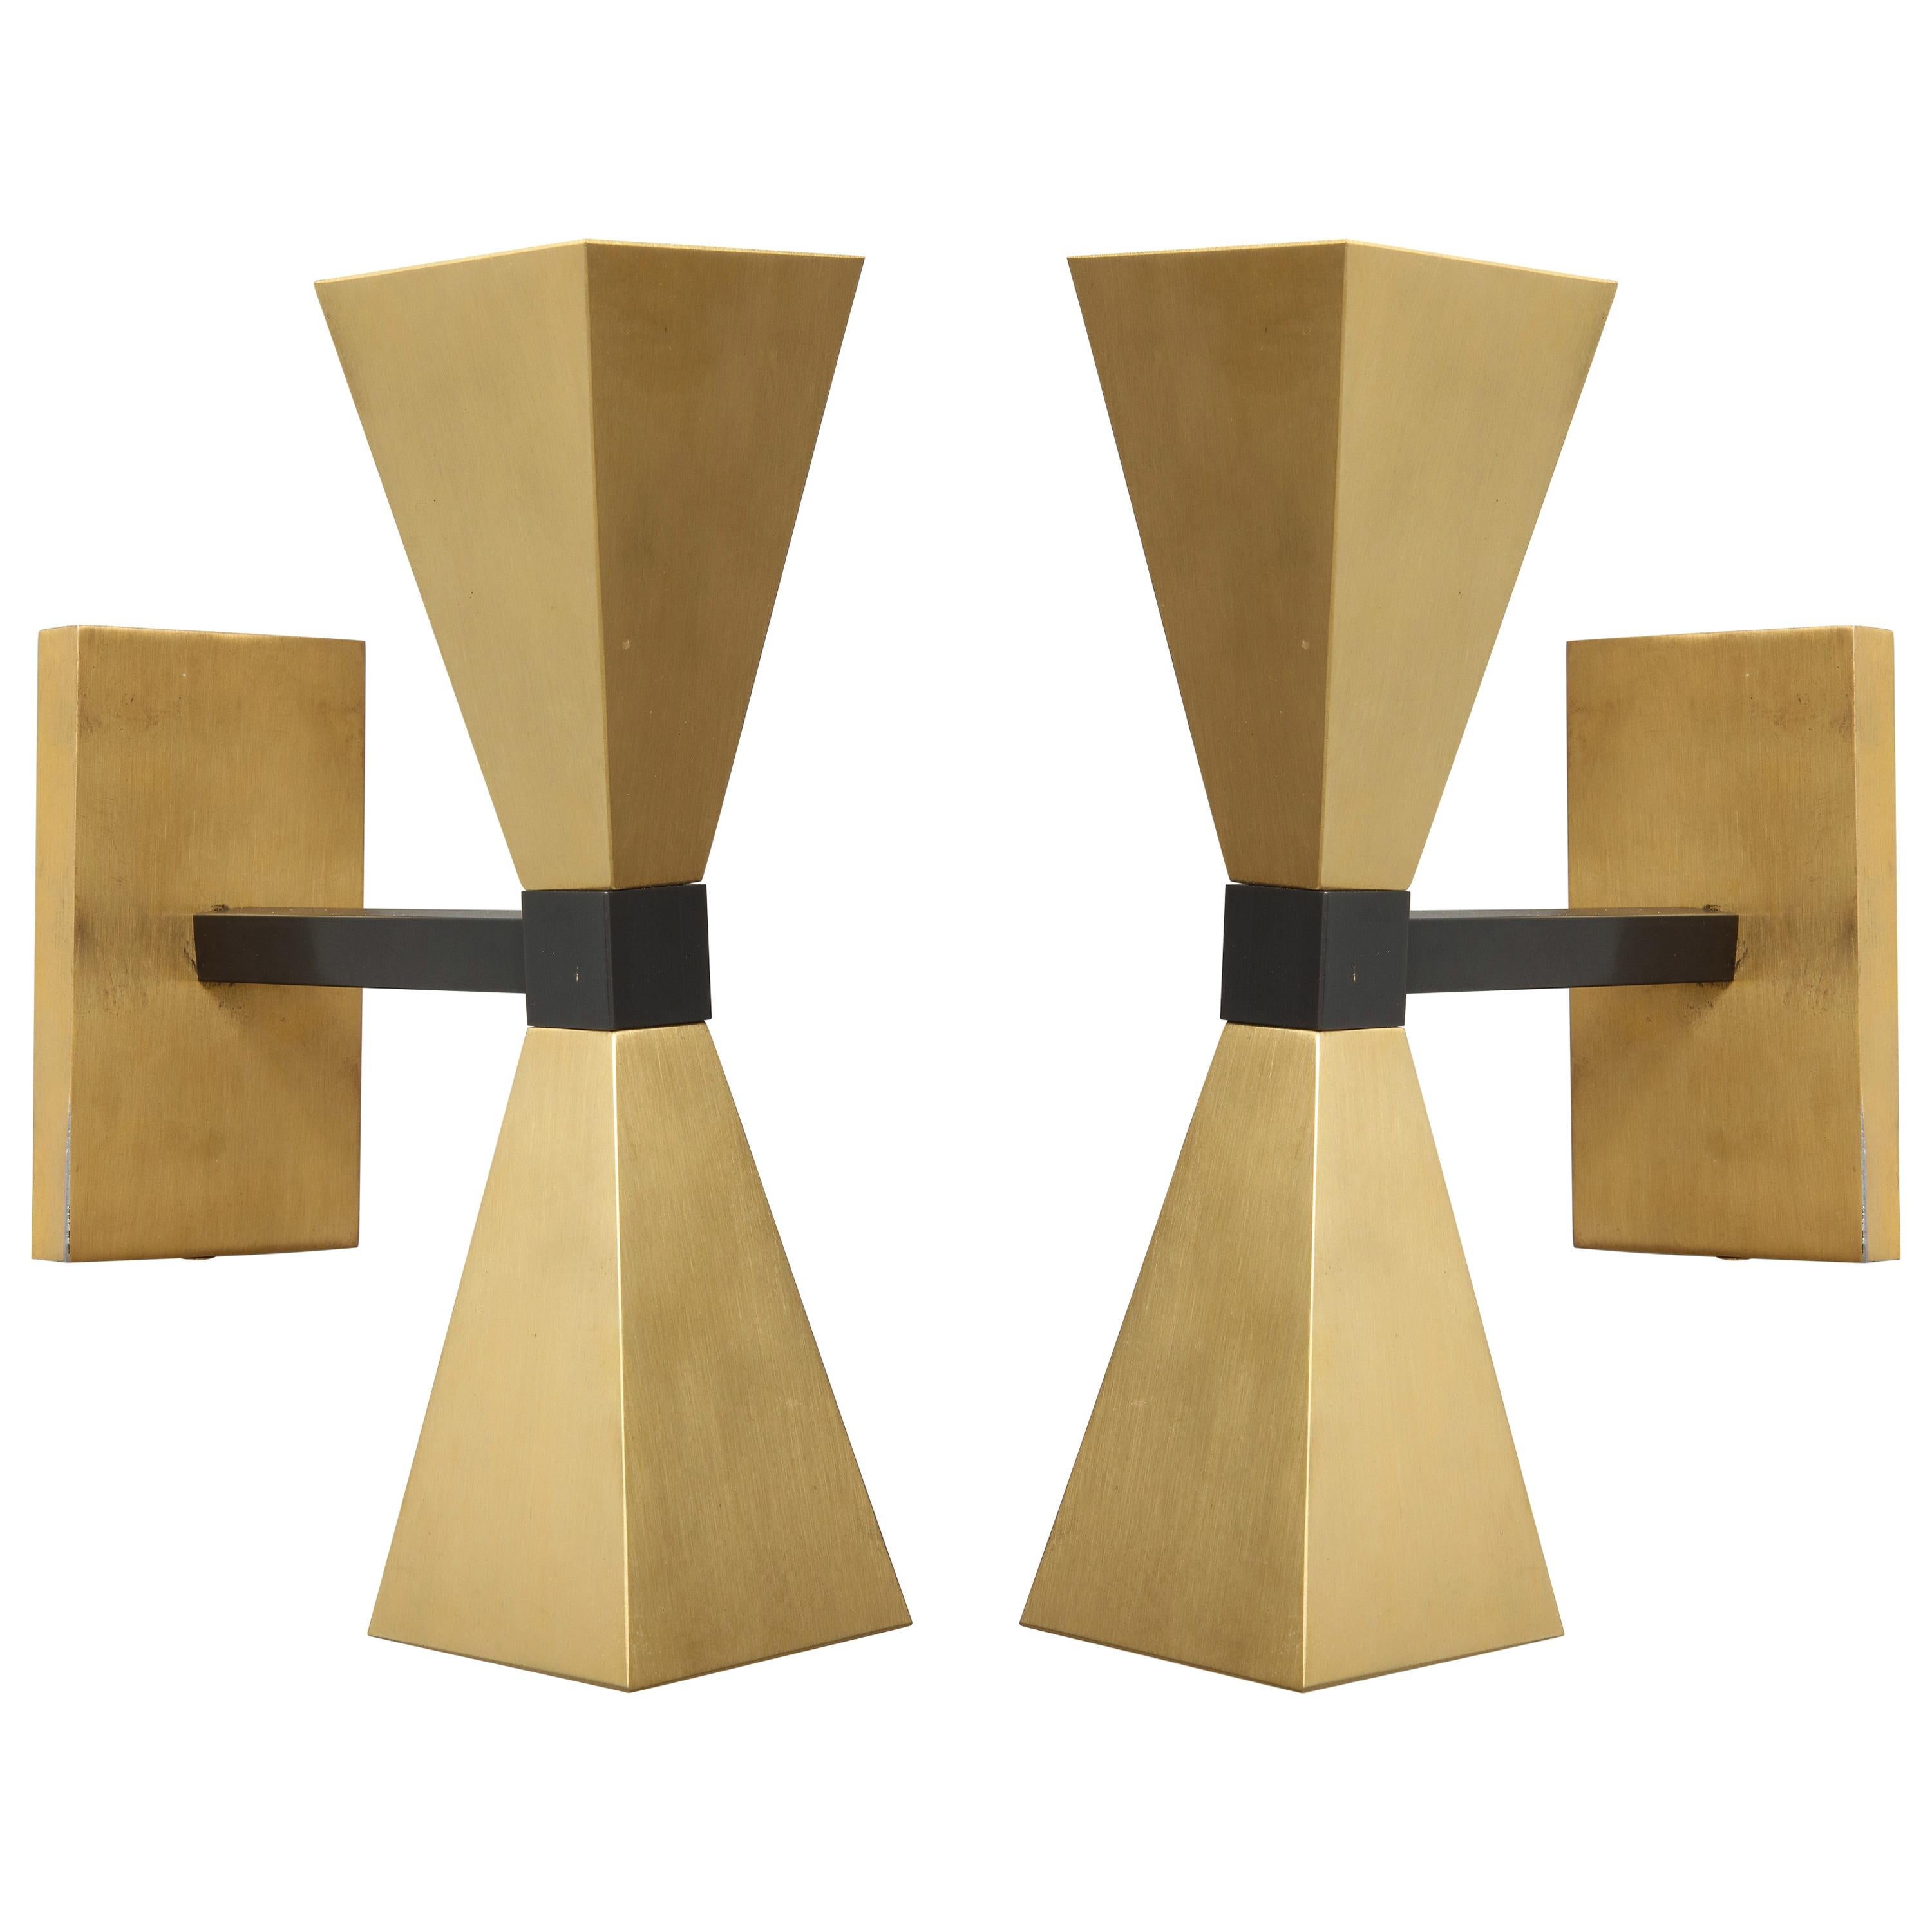 Pair of Custom Brass Sconces in the Style of Mid-Century Modern